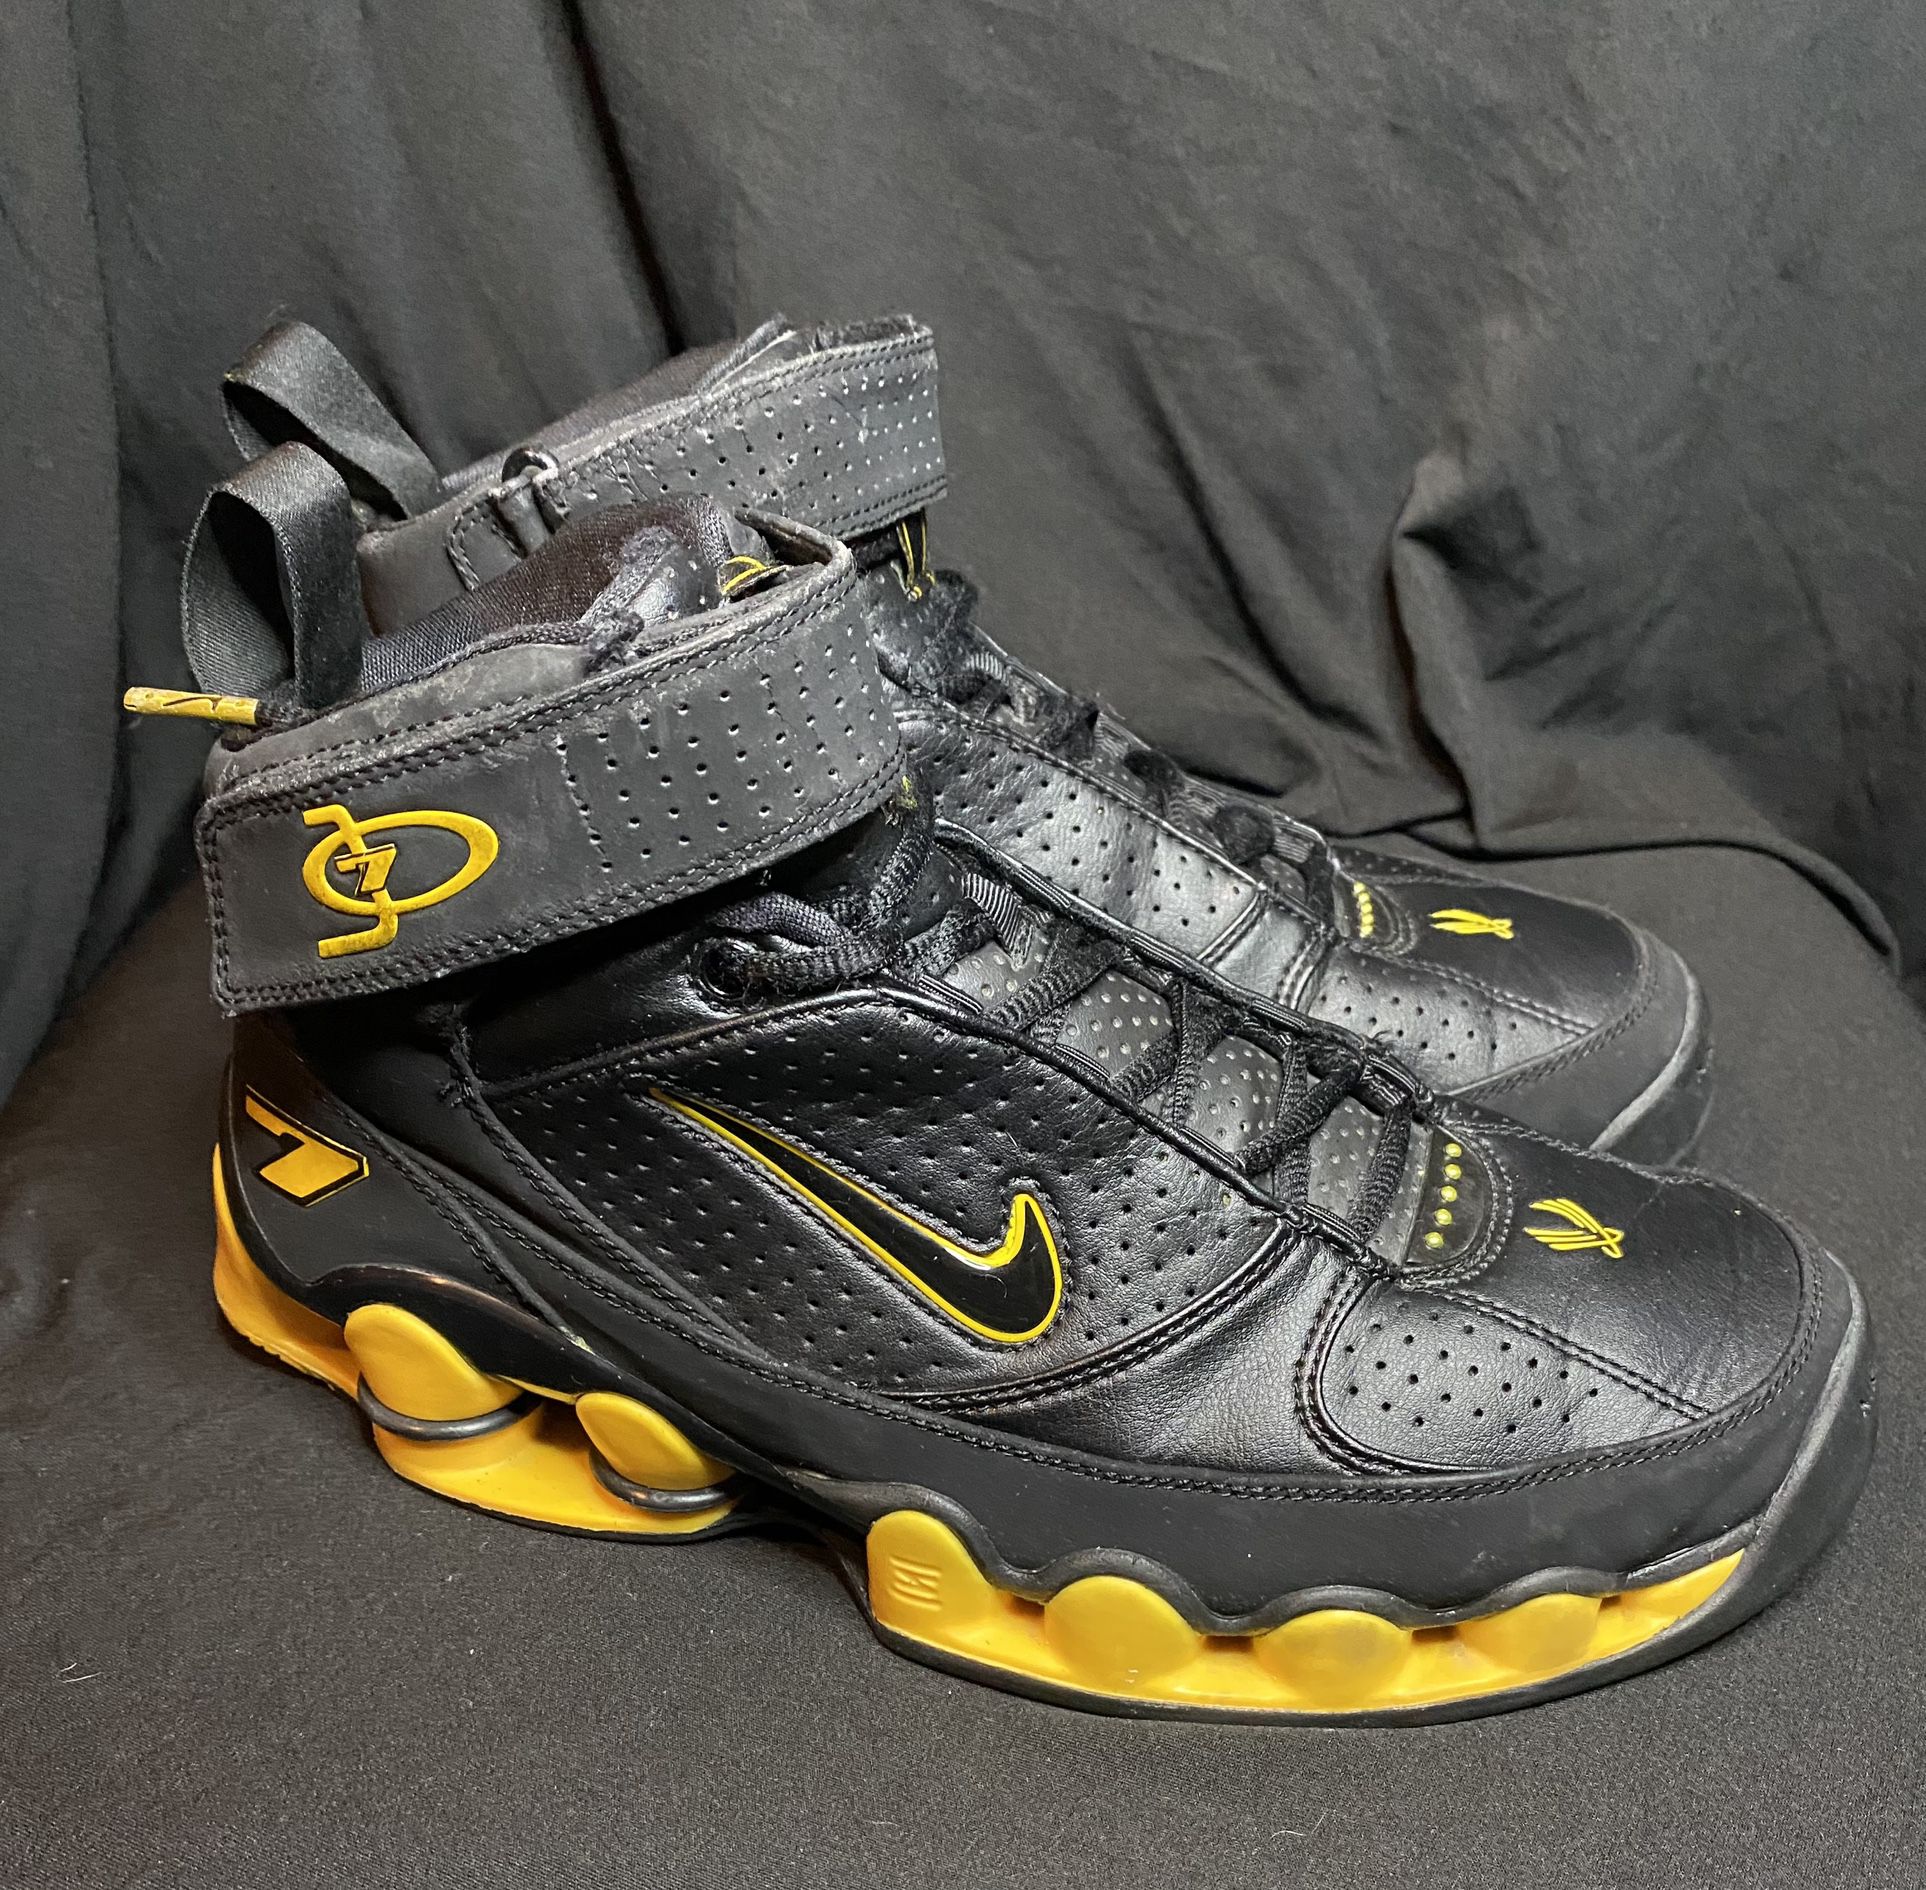 SHOX LETHAL JERMAINE O'NEAL Black & Yellow 050911 LN3 Mens Size 9 for Sale in Chicago, IL - OfferUp